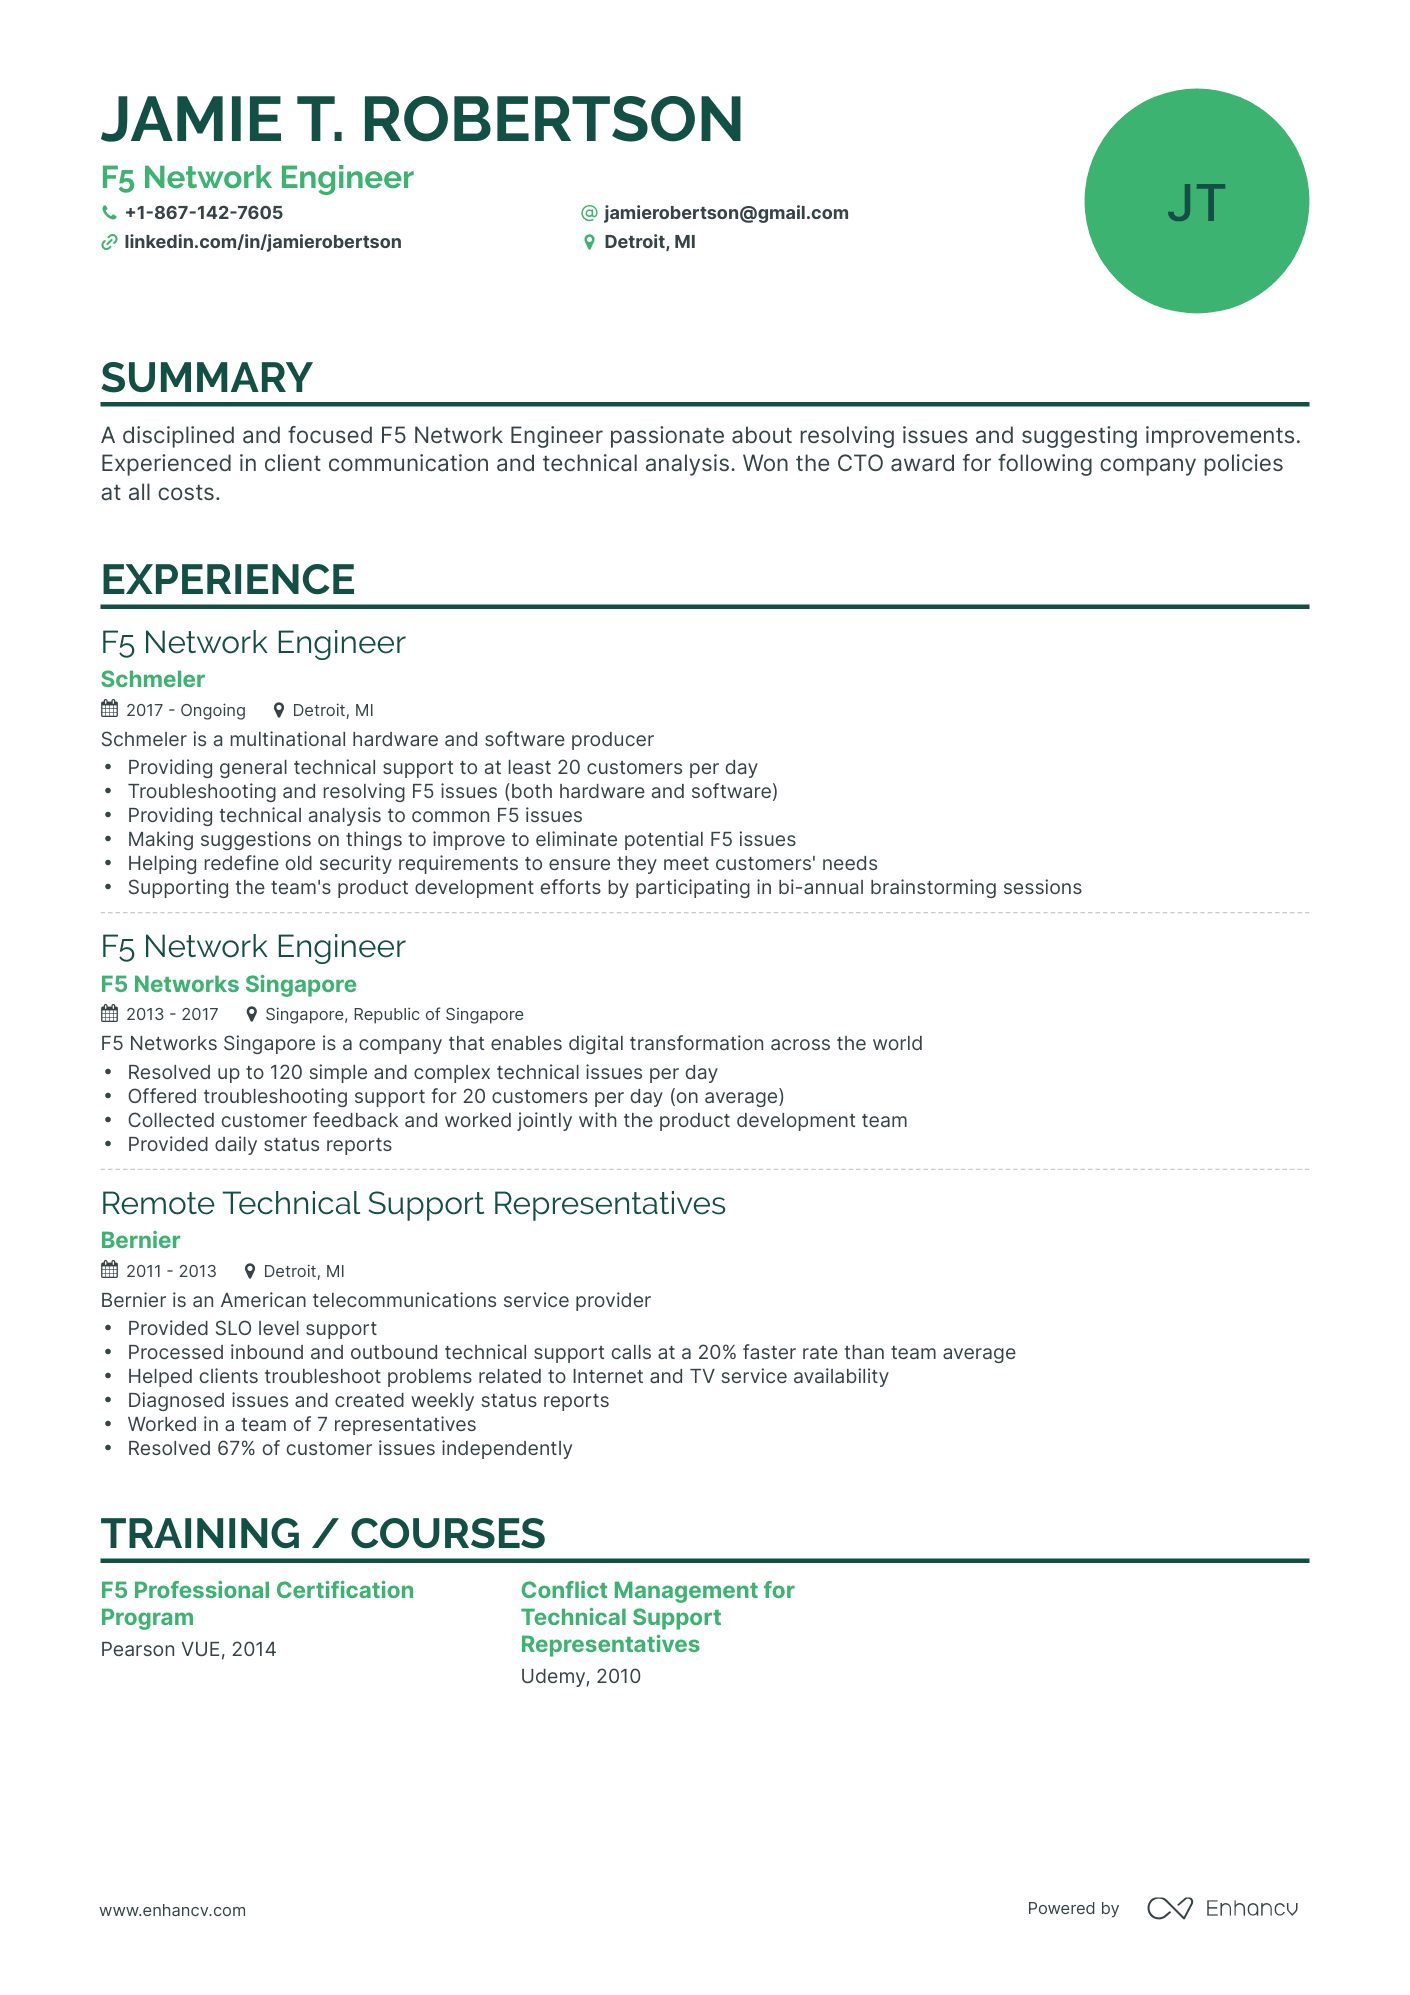 Classic F5 Network Engineer Resume Template